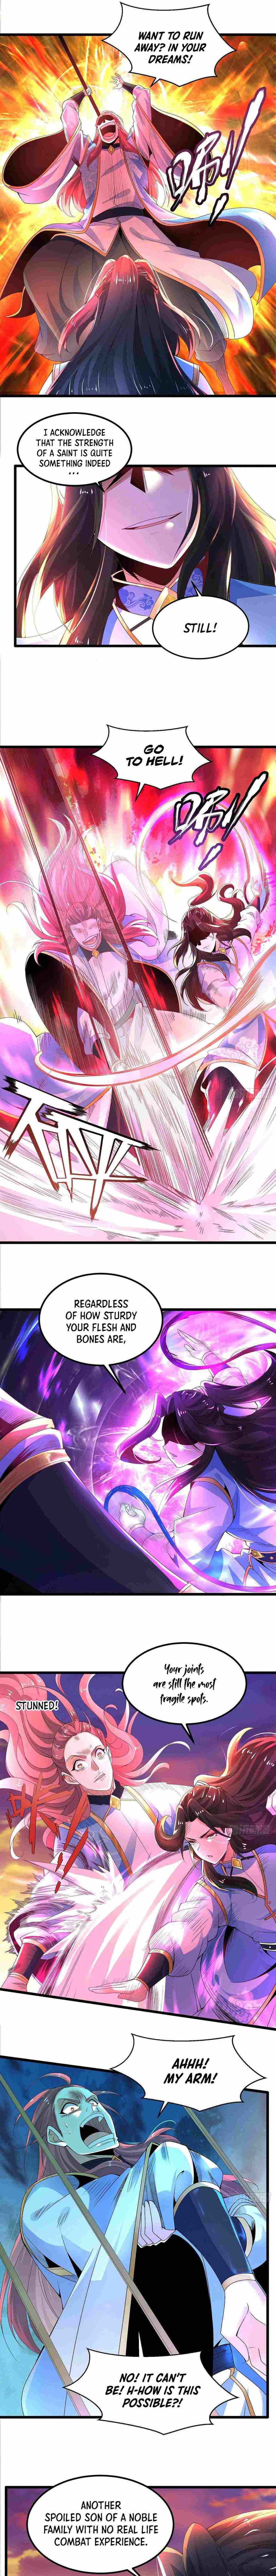 Chaotic Sword God (Remake) - Page 3